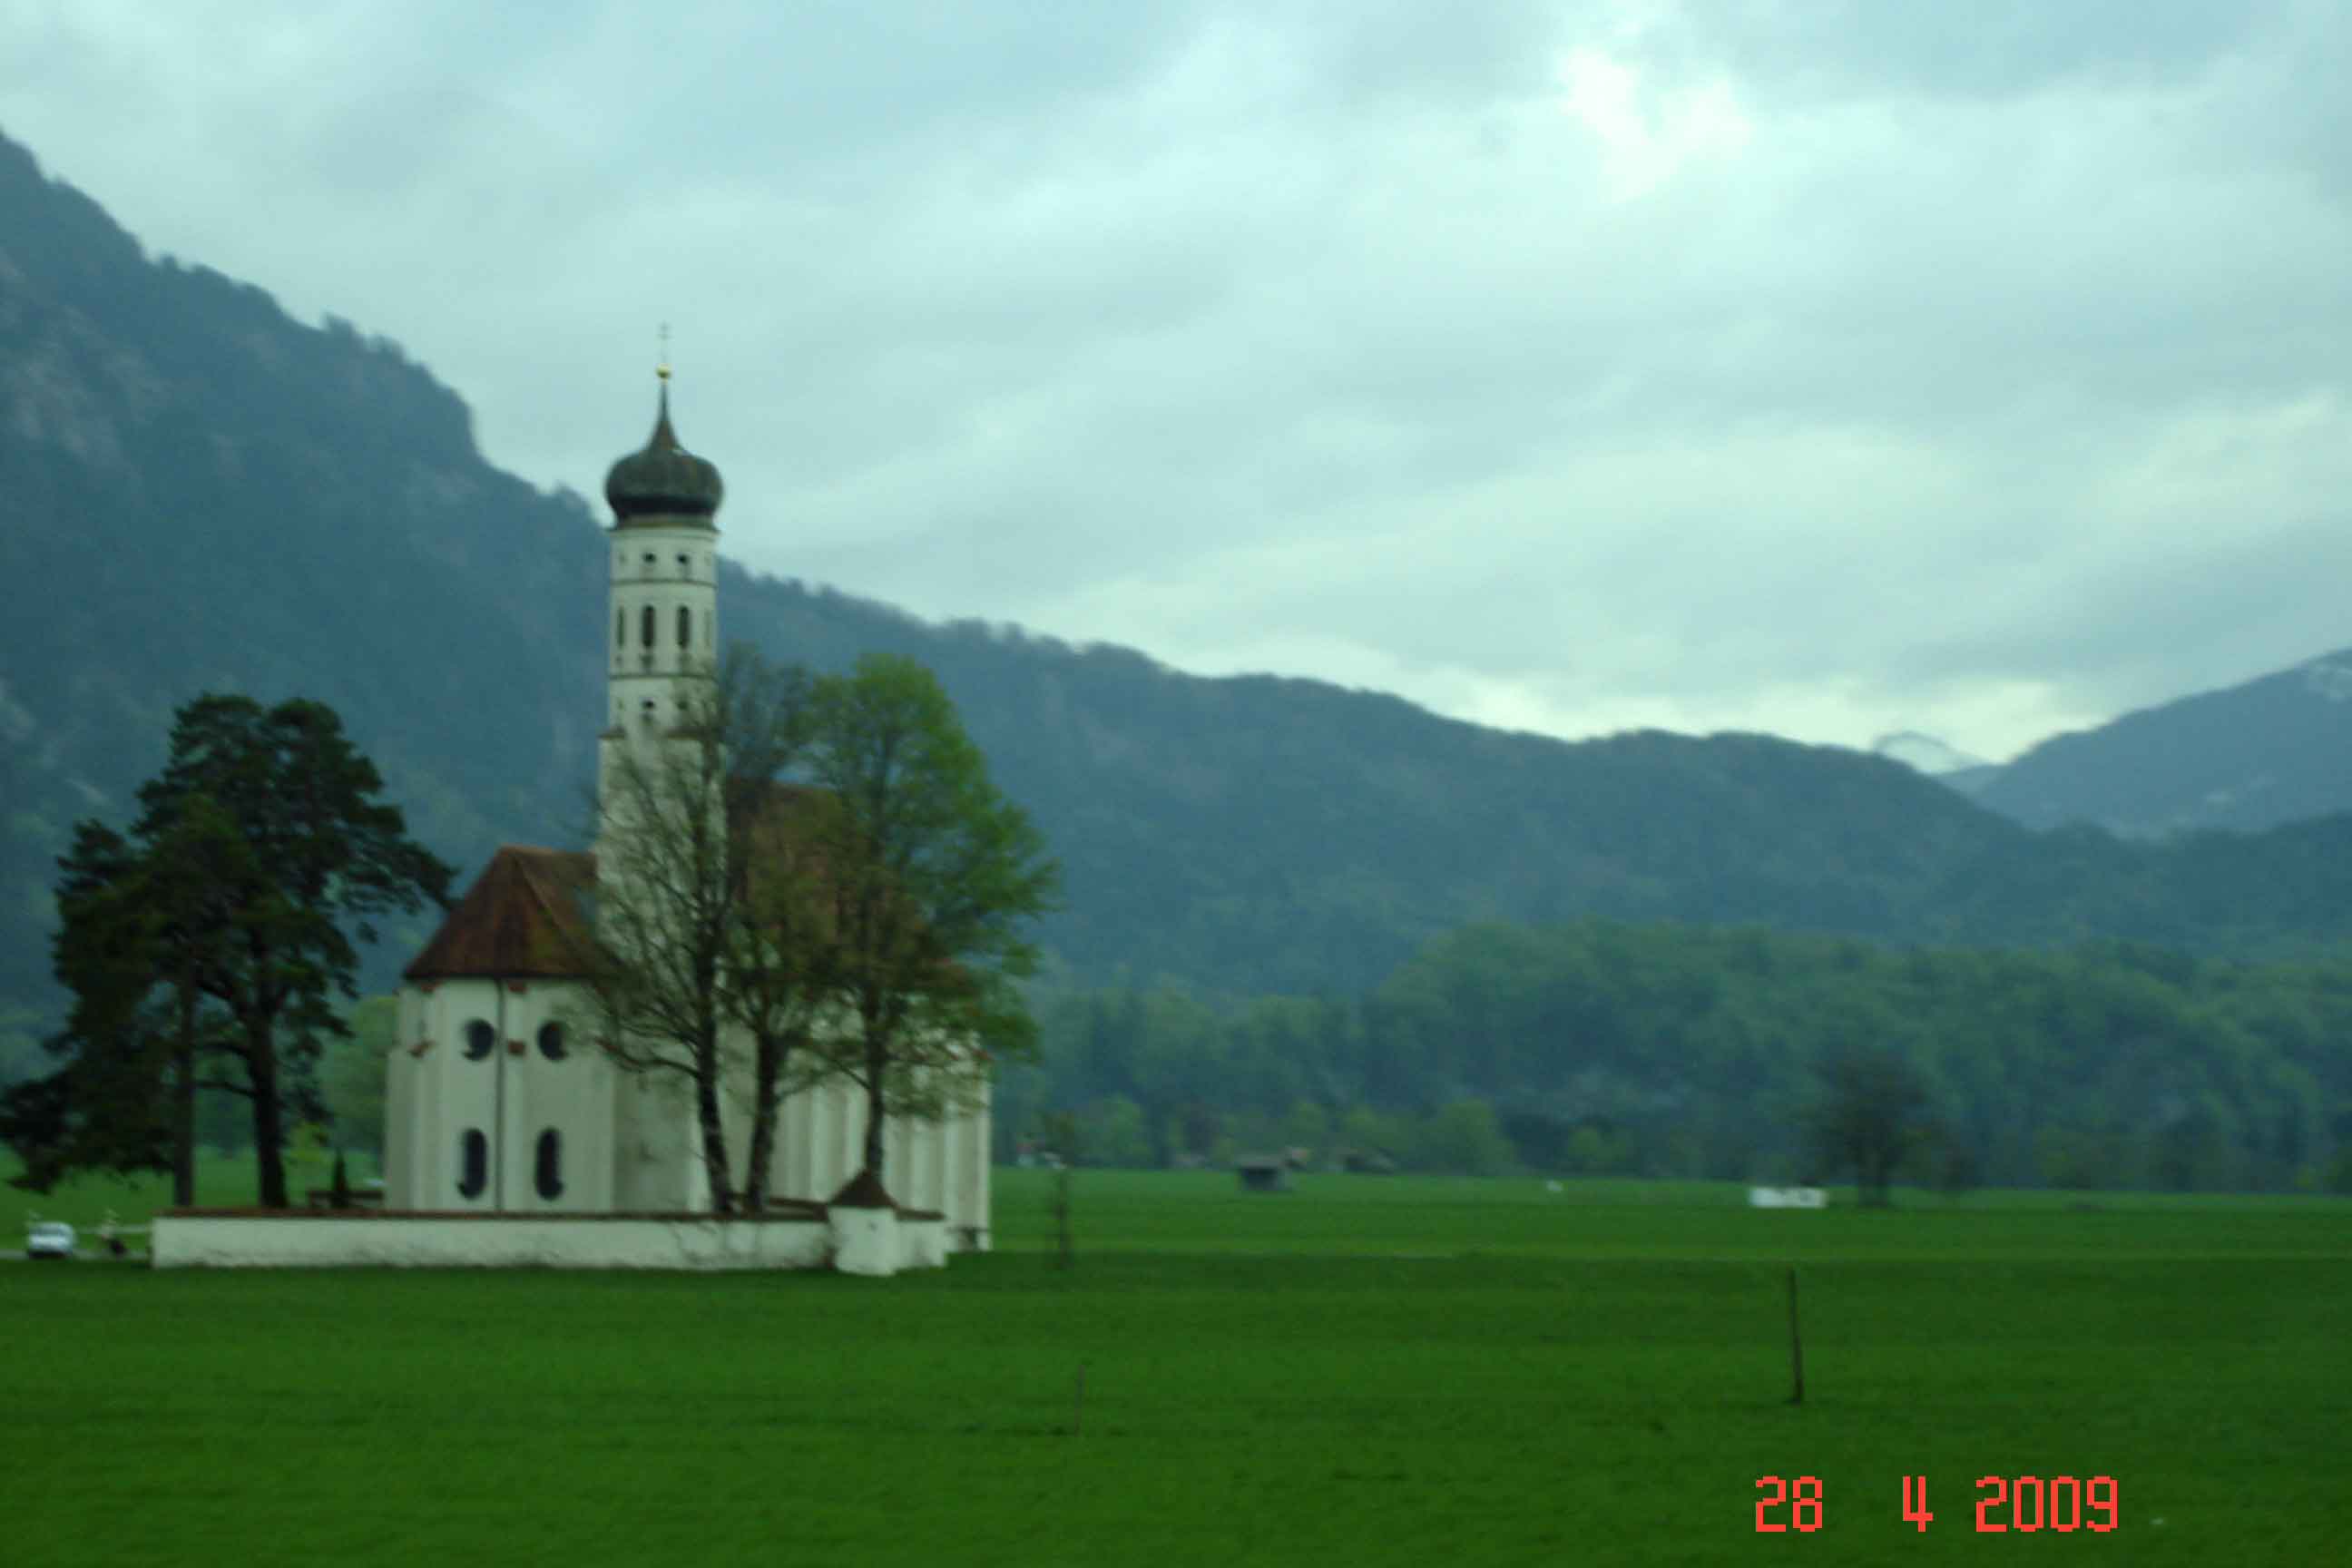 The Wies Pilgrimage Church of the "Scourged Savior"